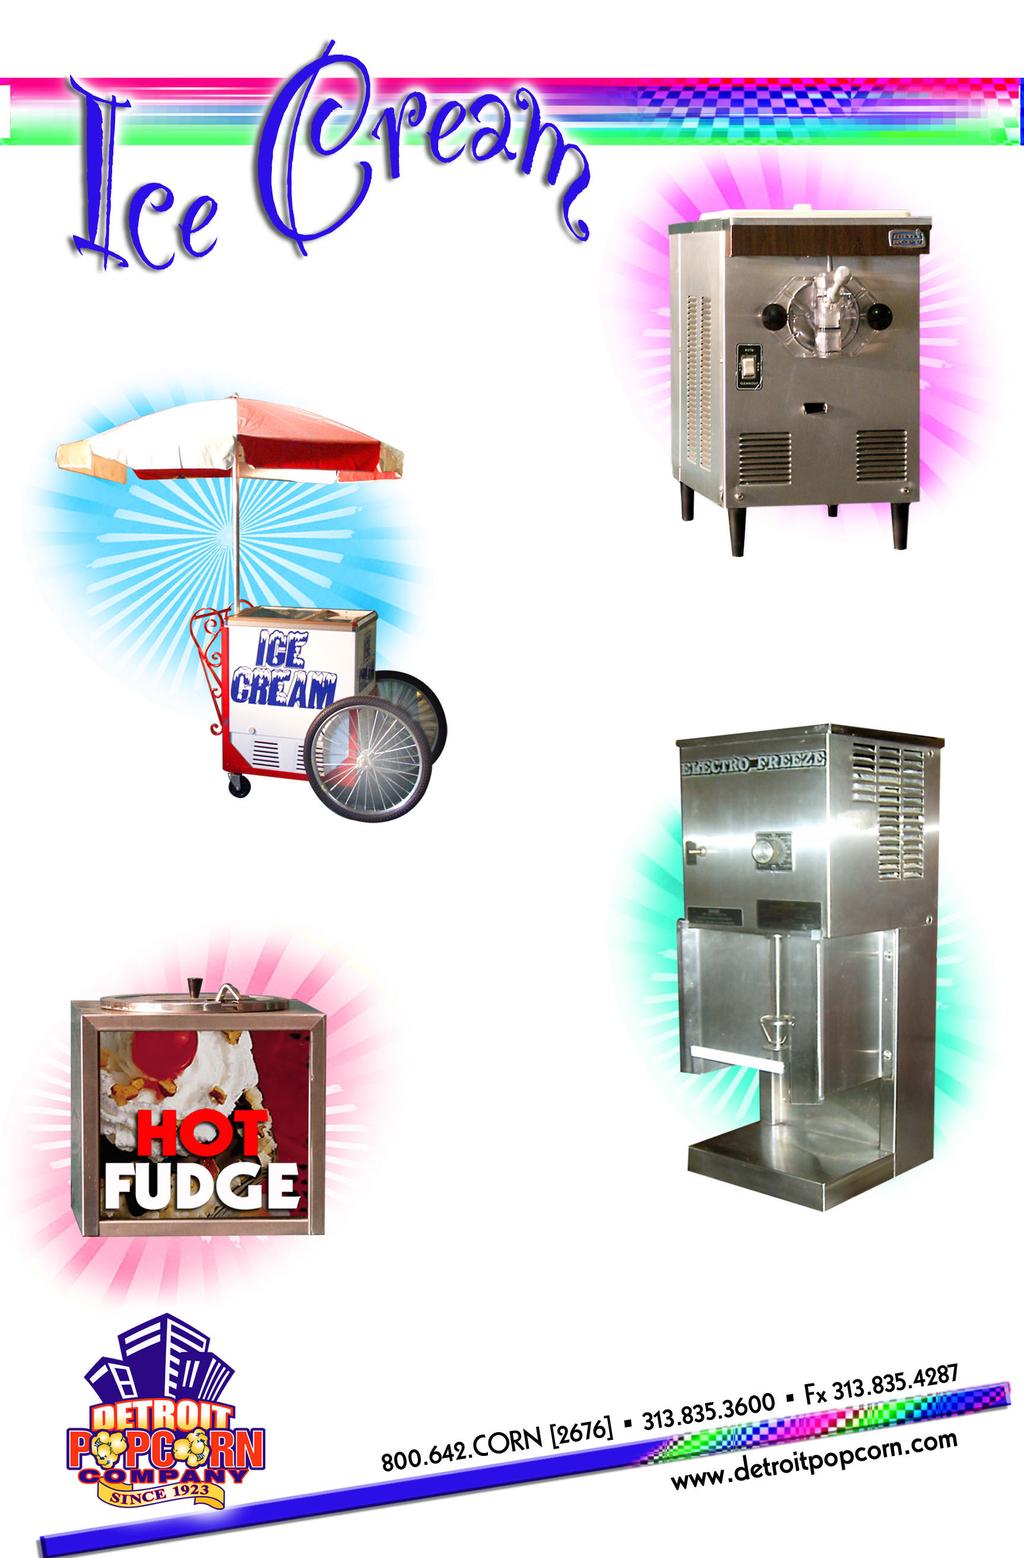 # 200 Low Volume Soft Ice Cream Machine This unit is perfect for home or office parties. It produces about two cones per minute. Can be used for frozen beverages.